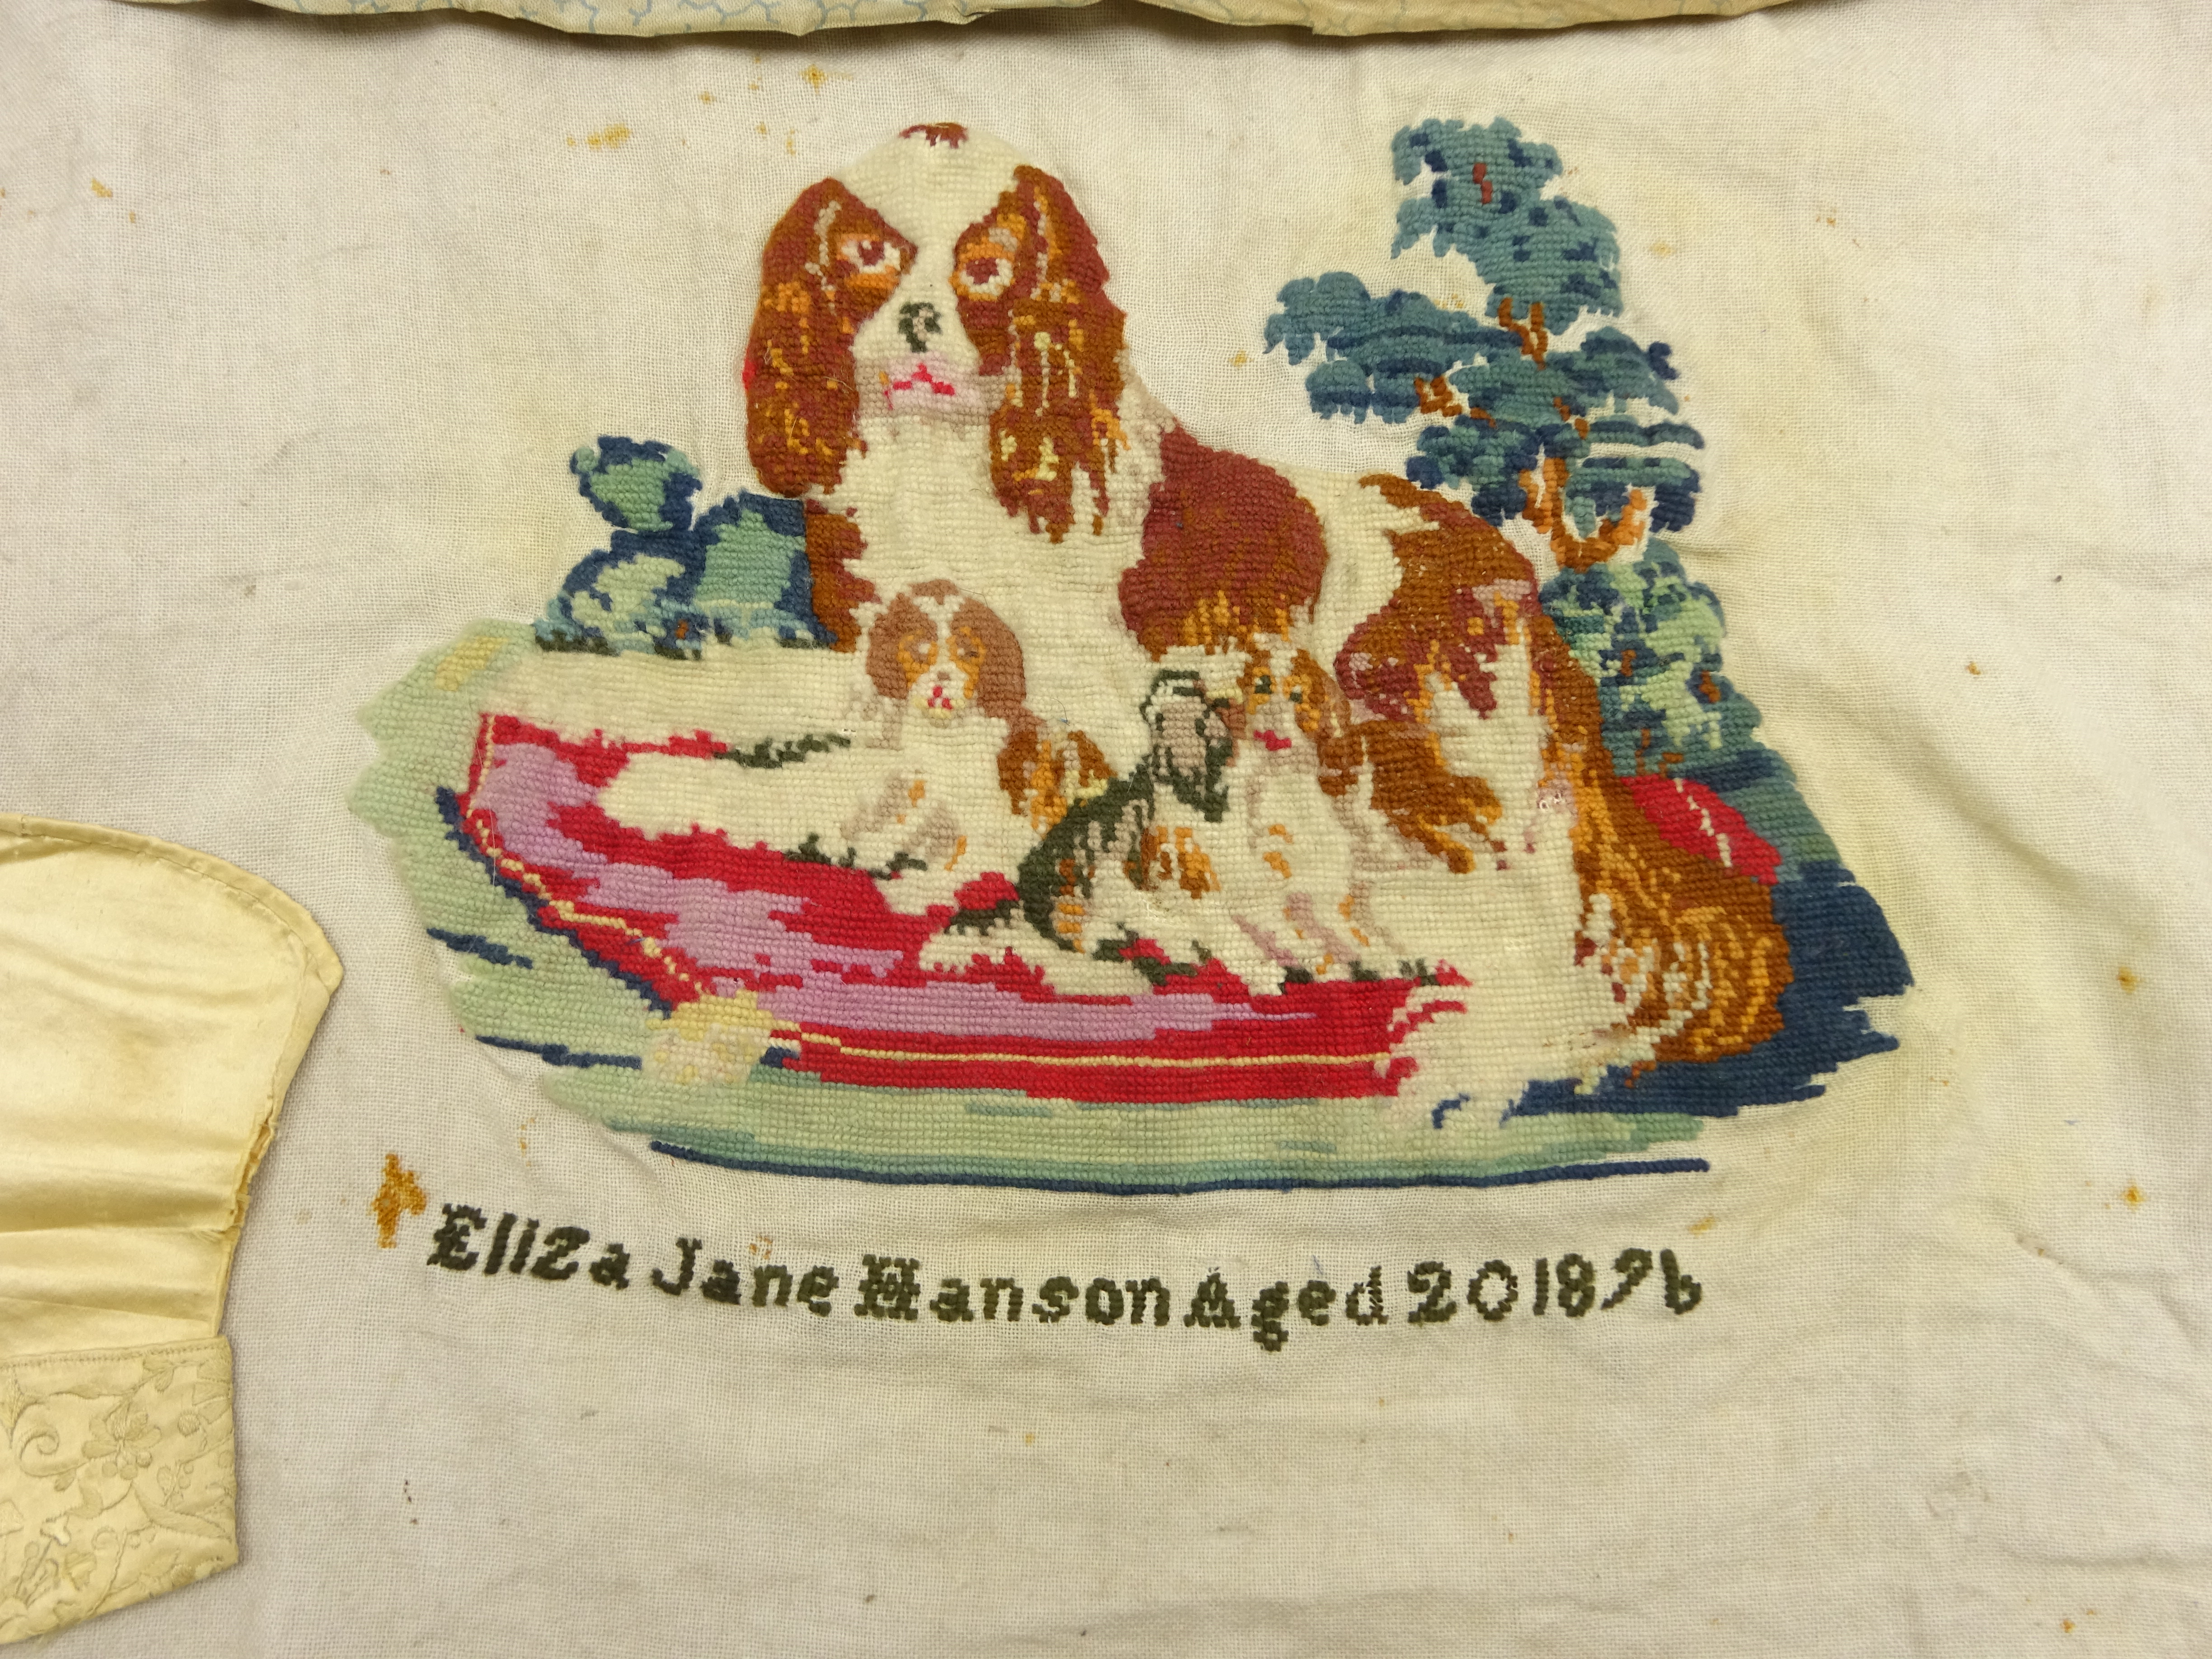 Late Victorian Sampler depicting a group of Spaniels by Eliza Jane Hanson Aged 20, 1896, - Image 2 of 3